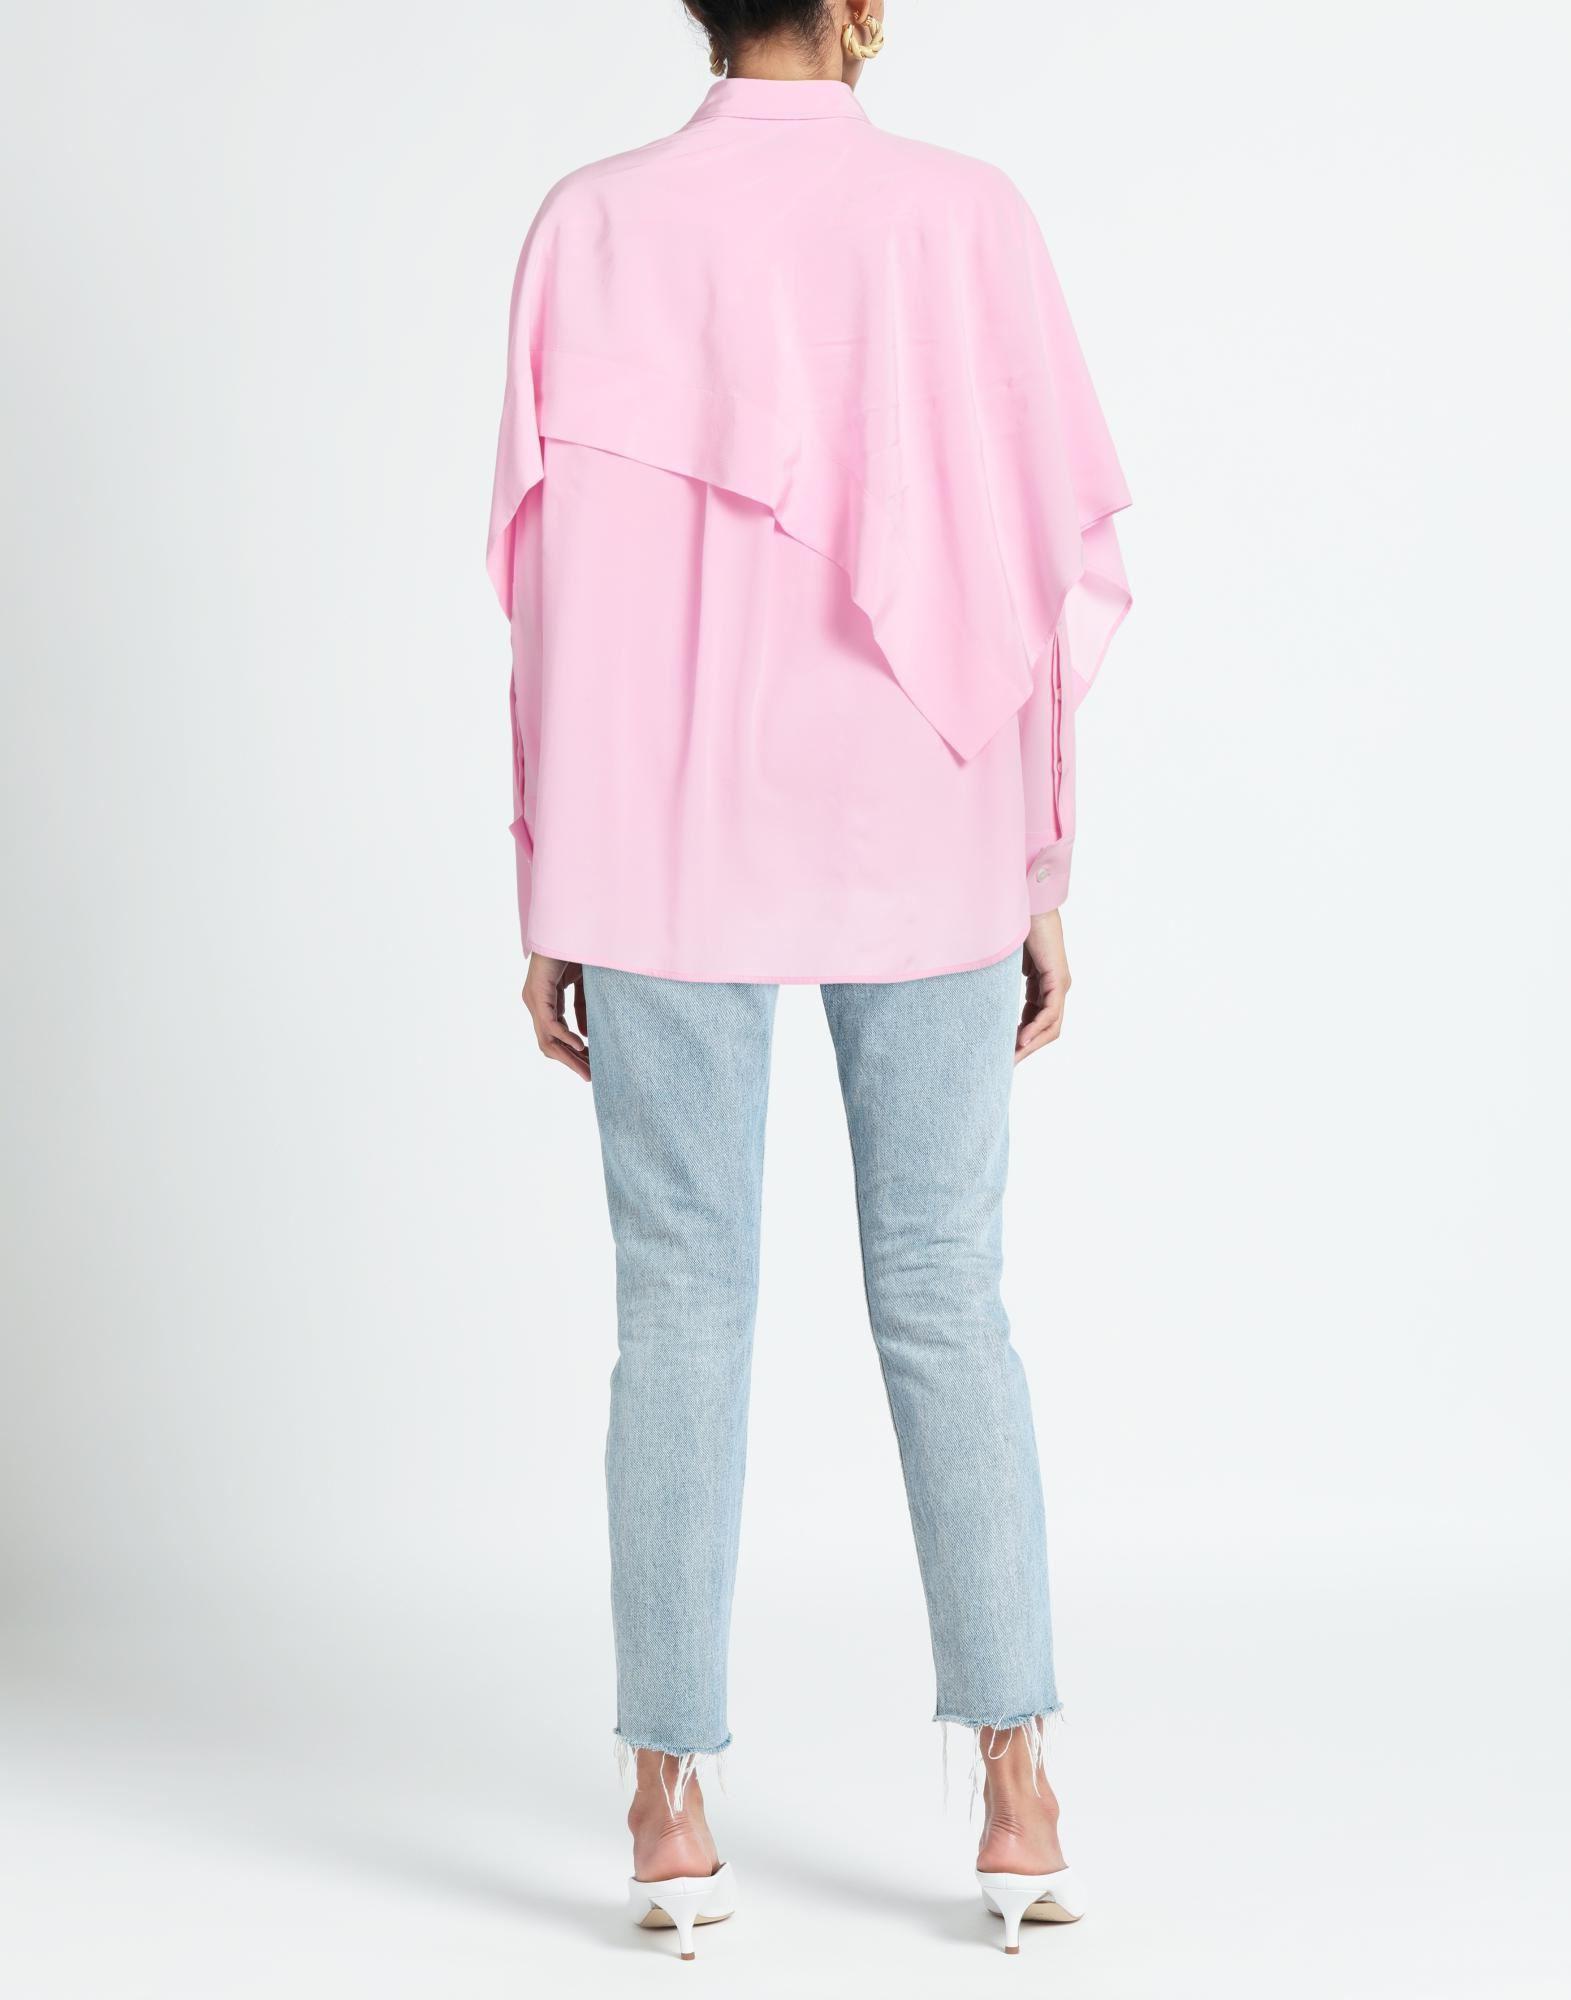 Quira Shirt in Pink | Lyst